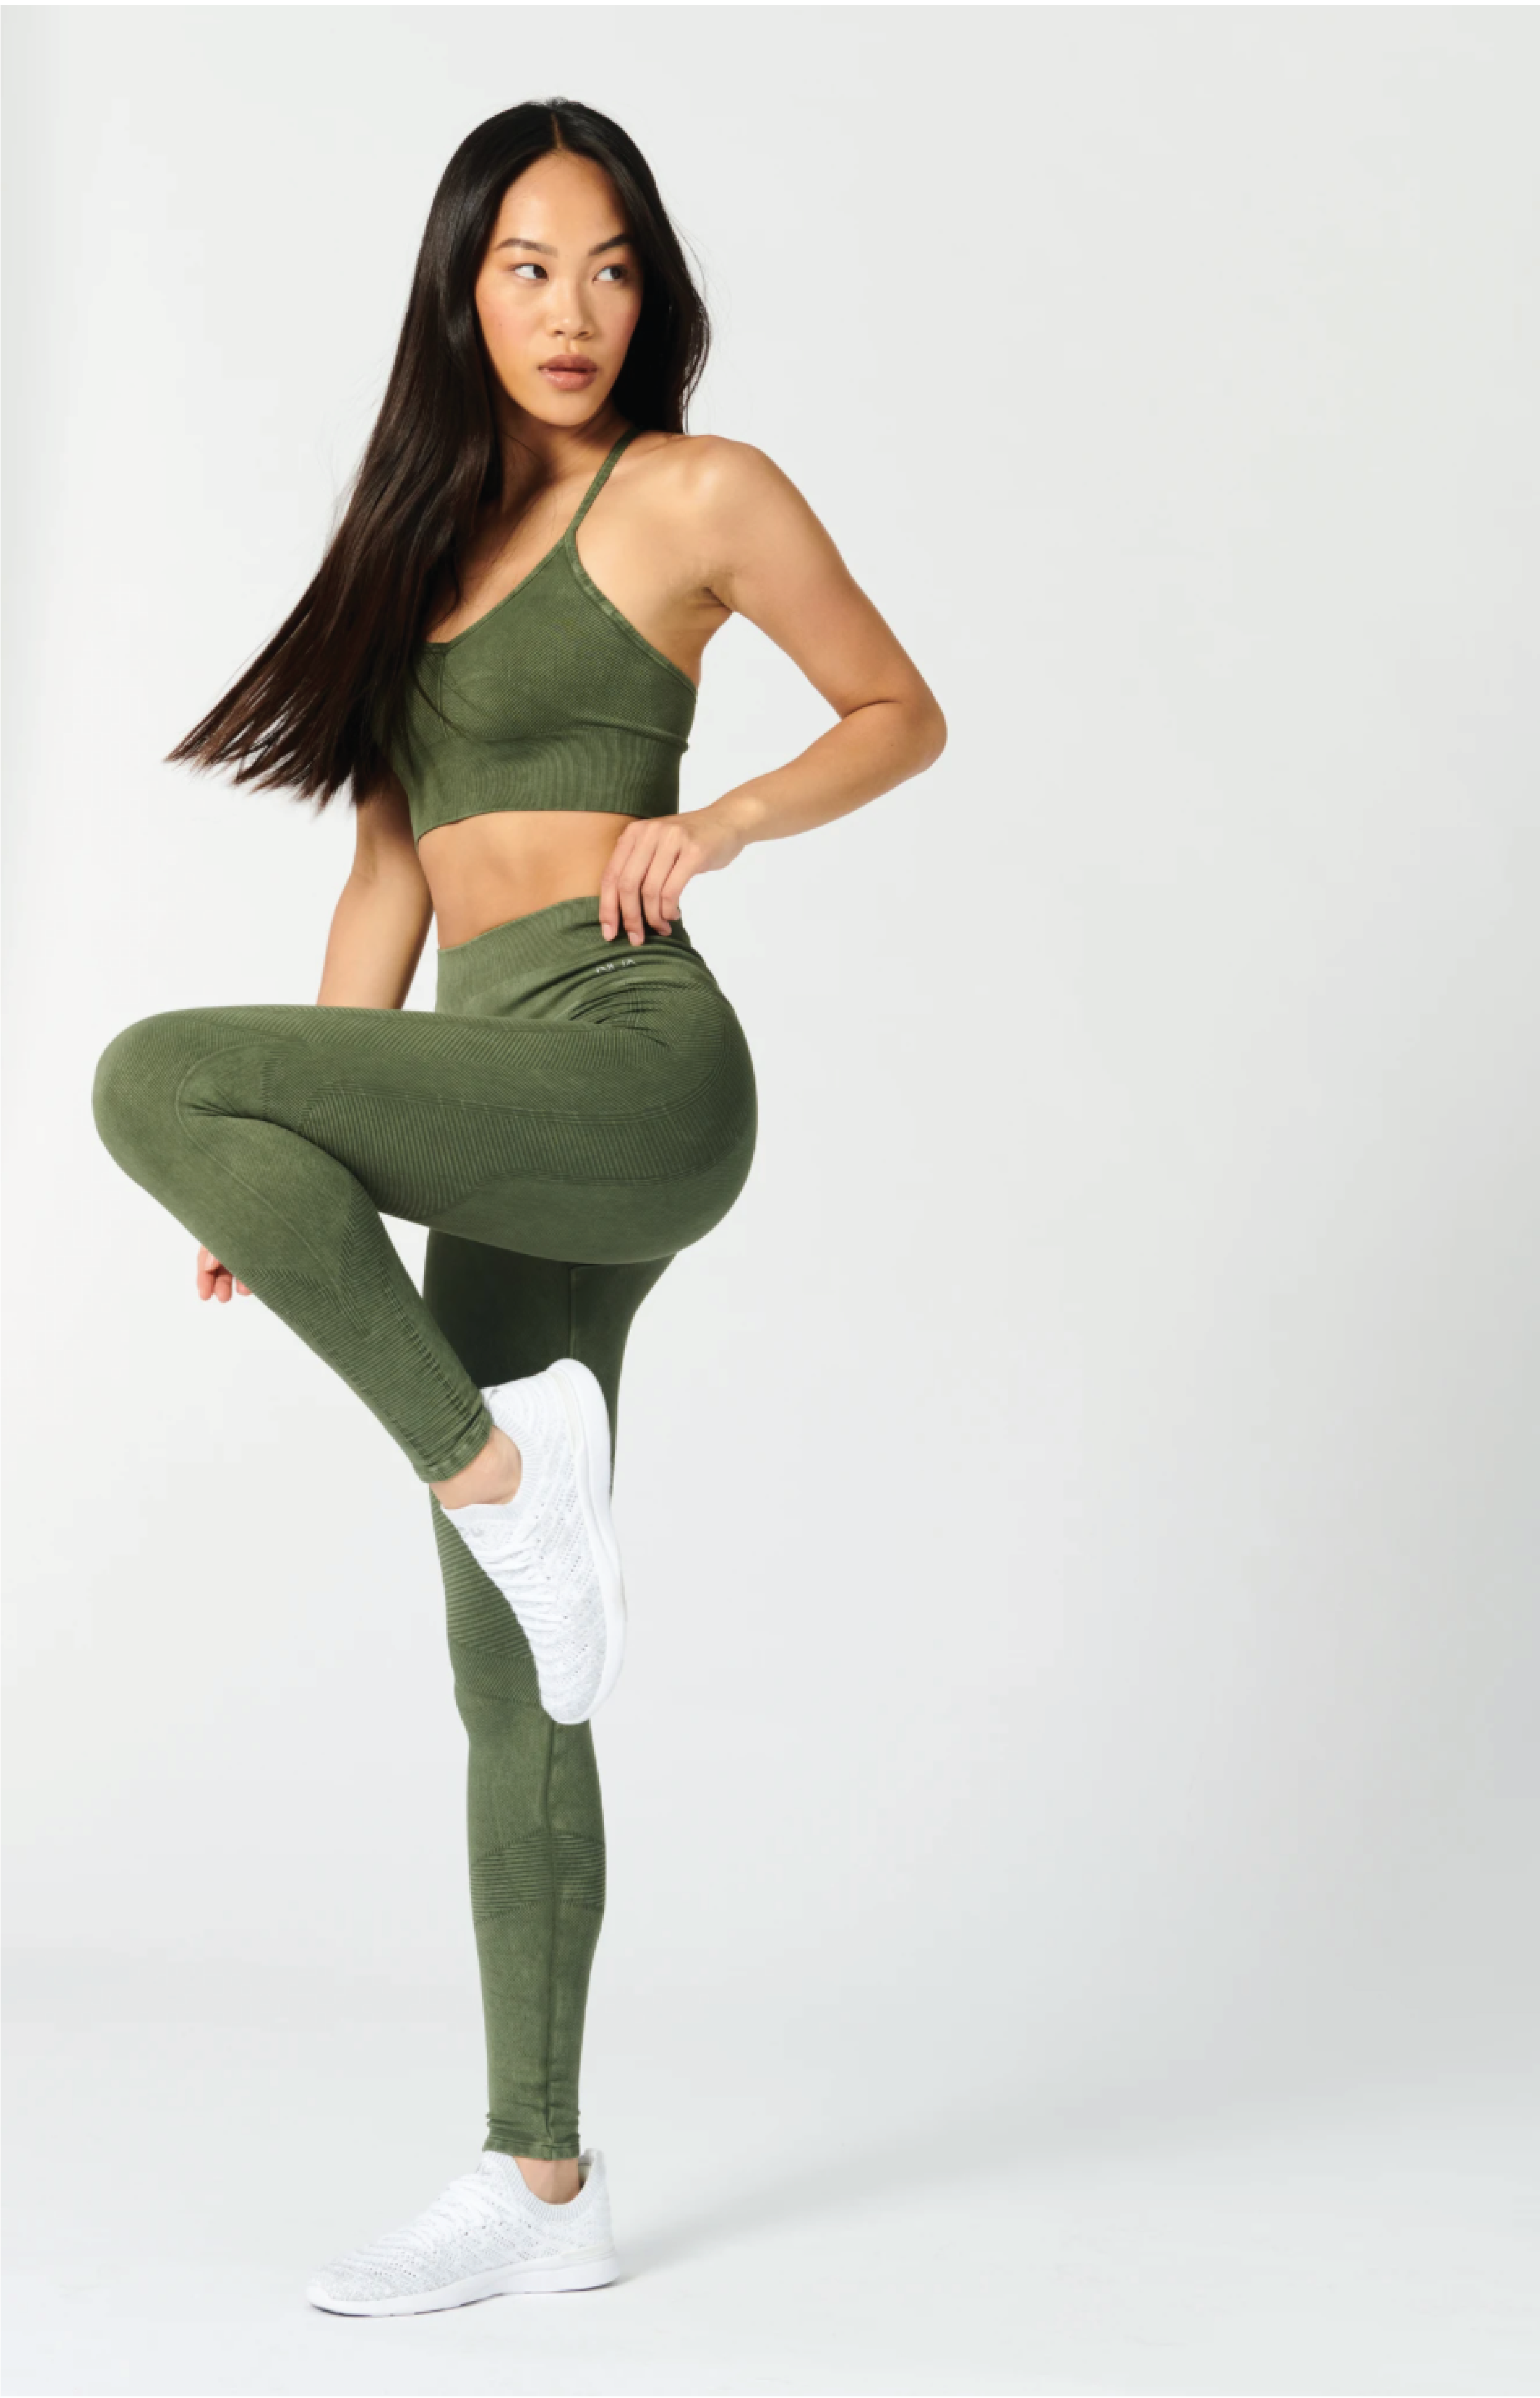 One by One Legging -Moss